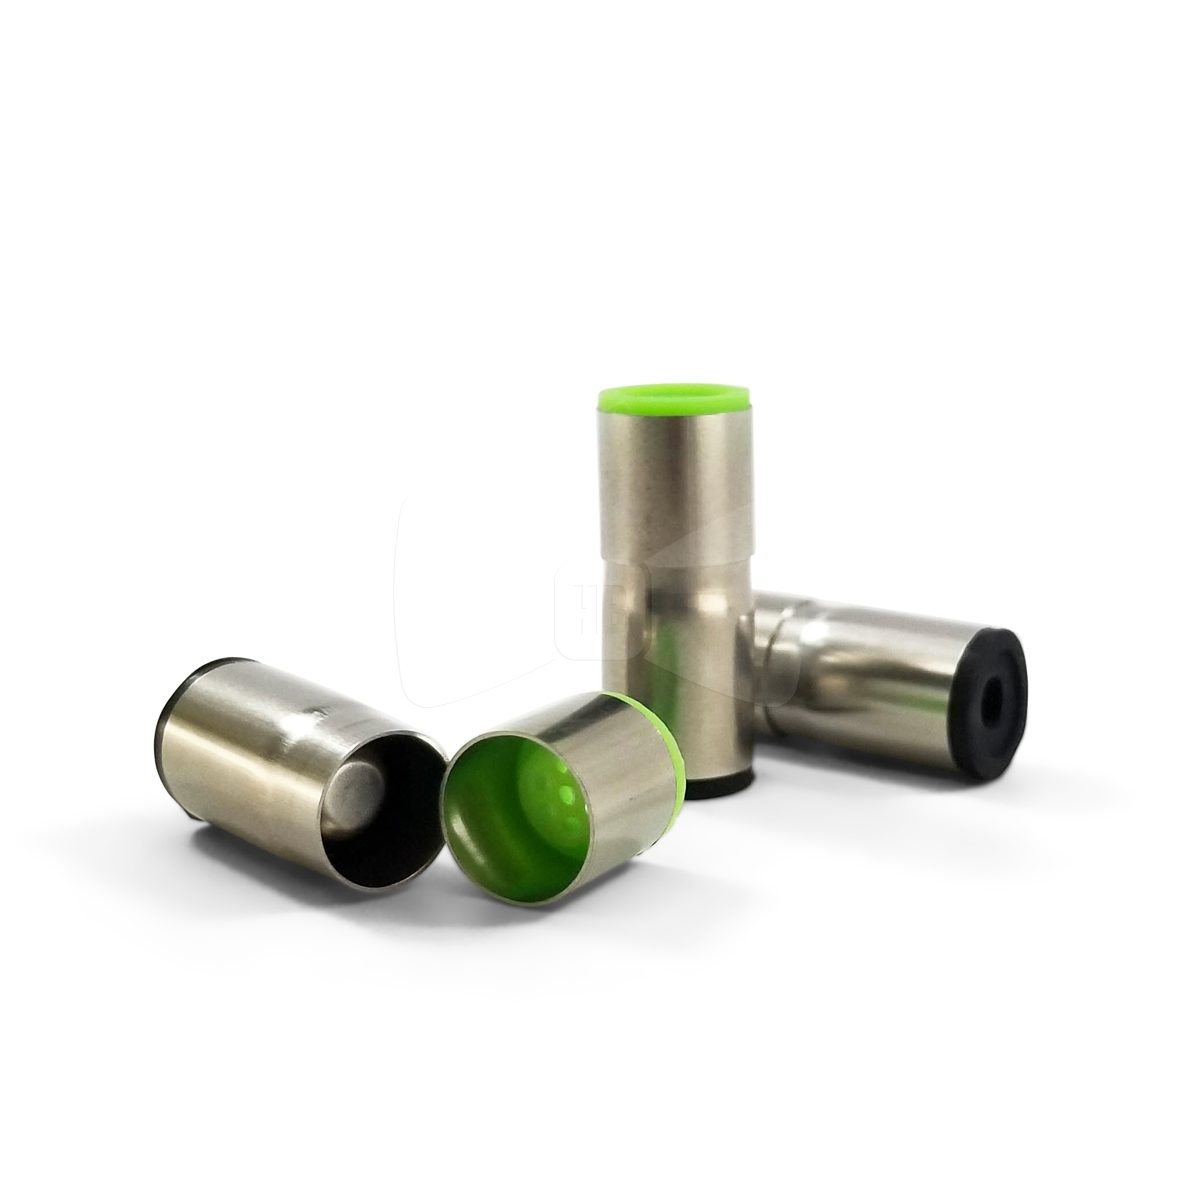 VIE Vaporizer Concentrate Capsules